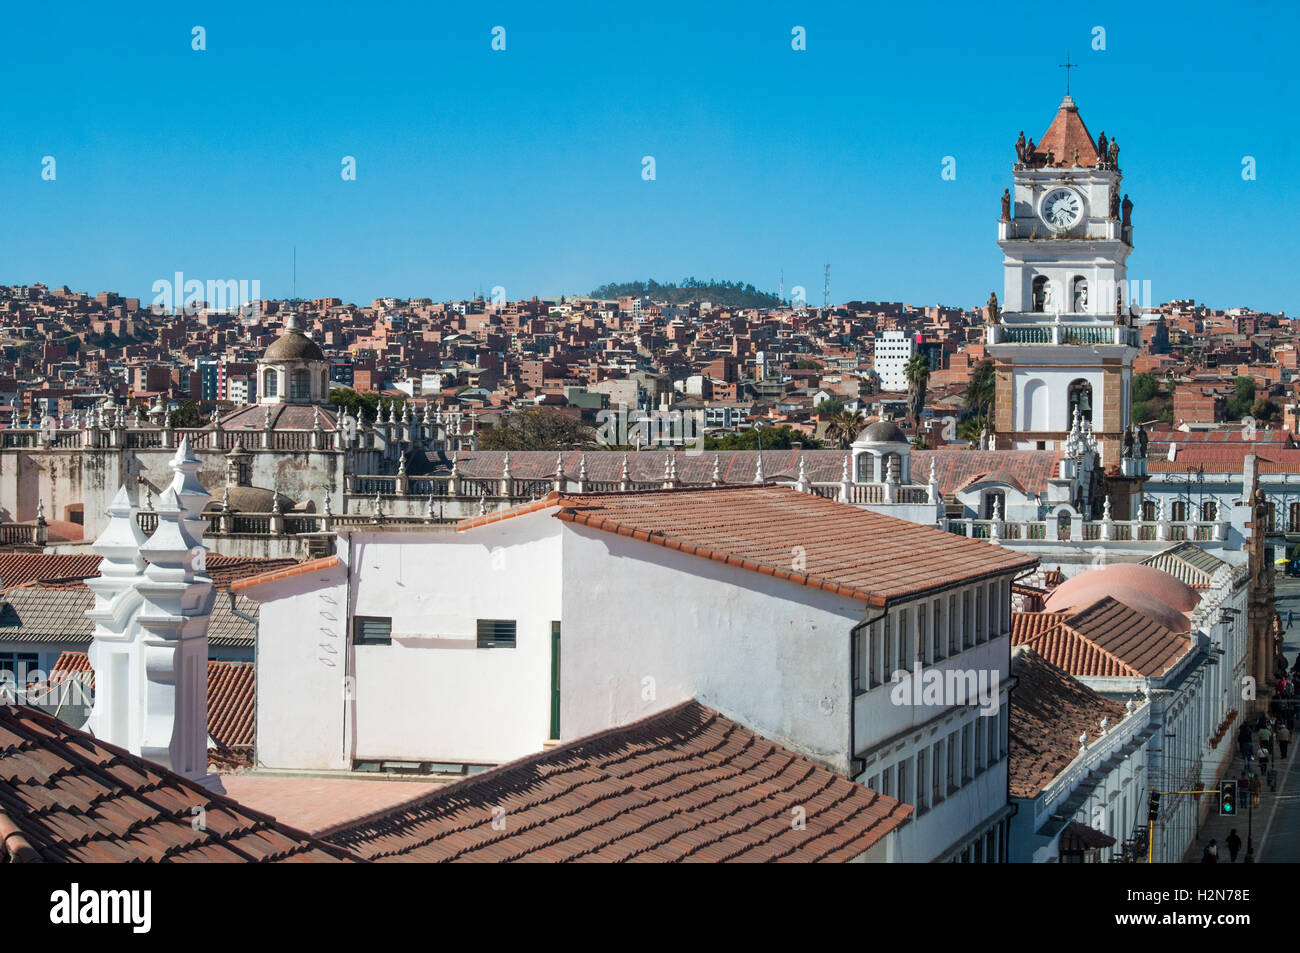 Rooftops of Sucre from the belltower of the Templo Nuestra Senora de la Merced Stock Photo